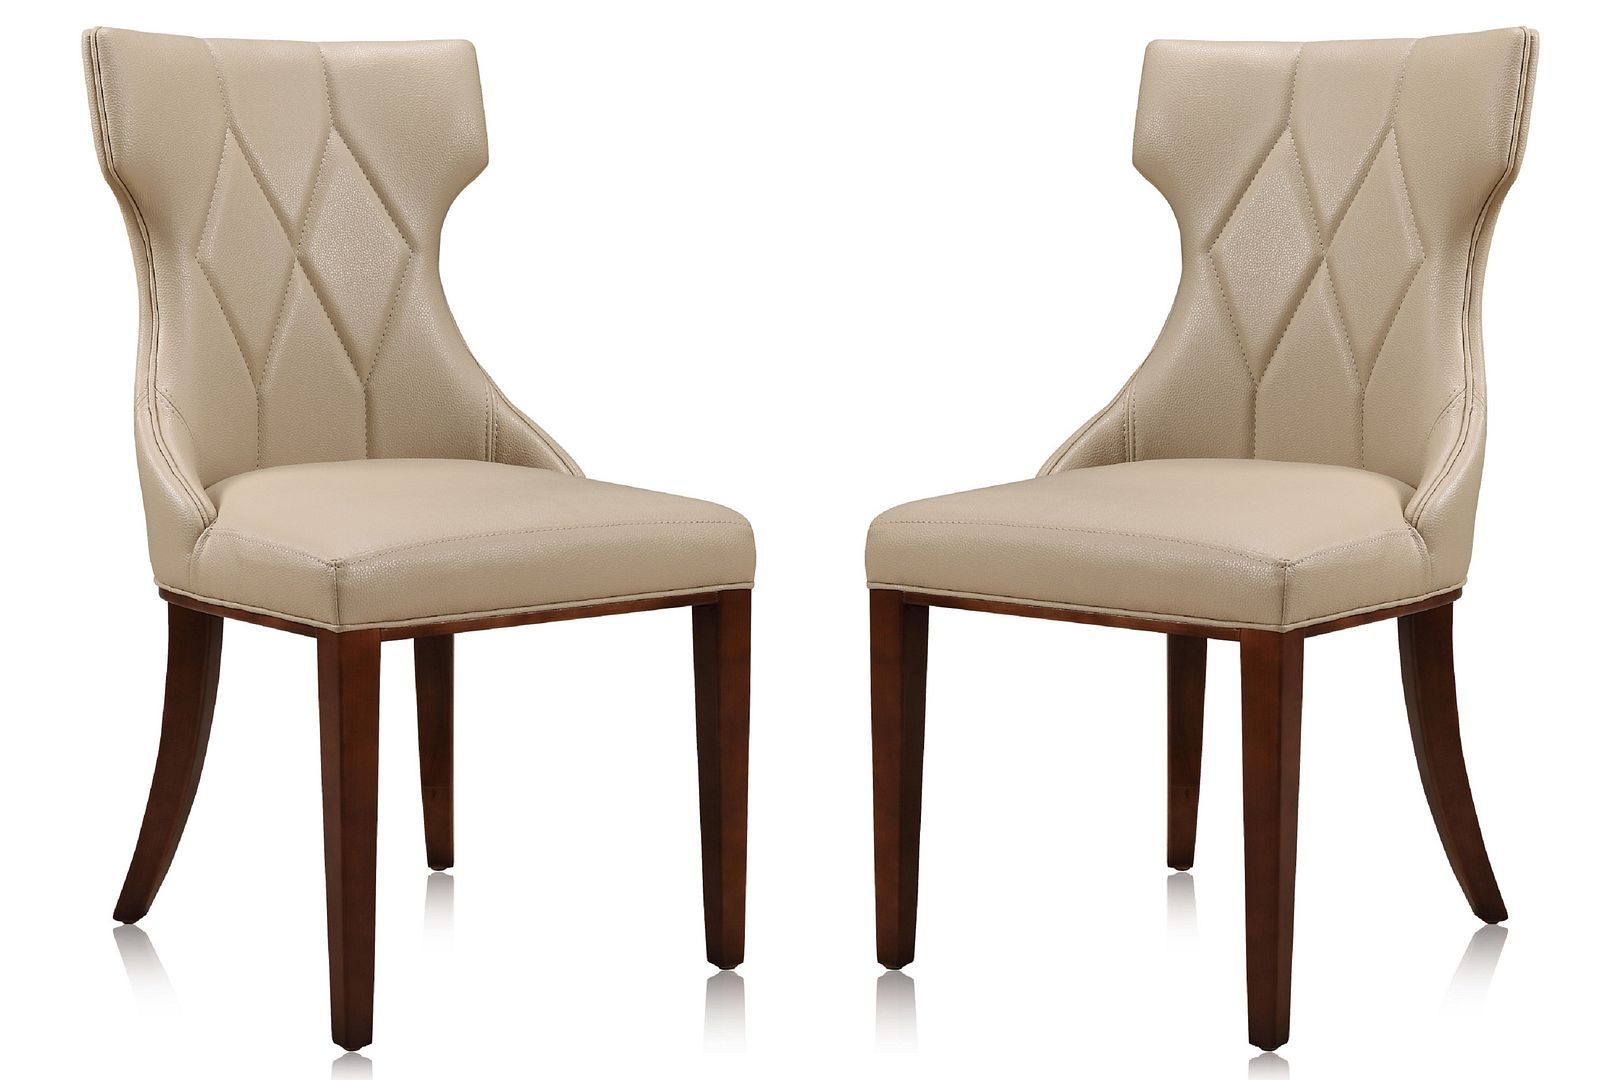 Reine Faux Leather Dining Chair - Set of 2 - East Shore Modern Home Furnishings